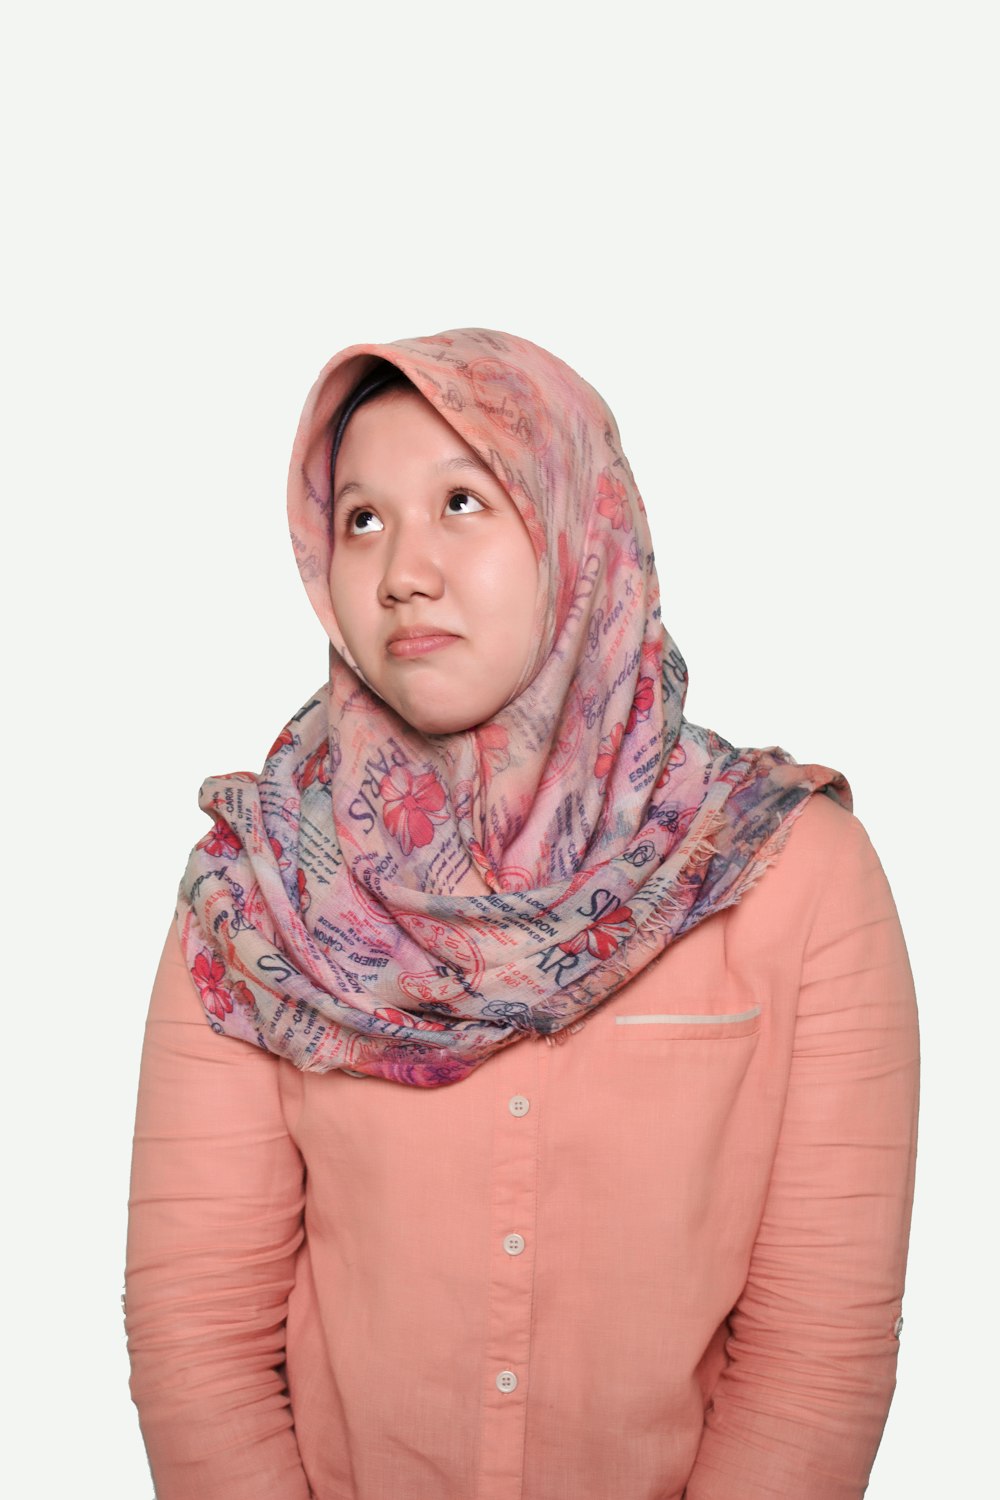 woman in pink button up long sleeve shirt wearing gray and white hijab